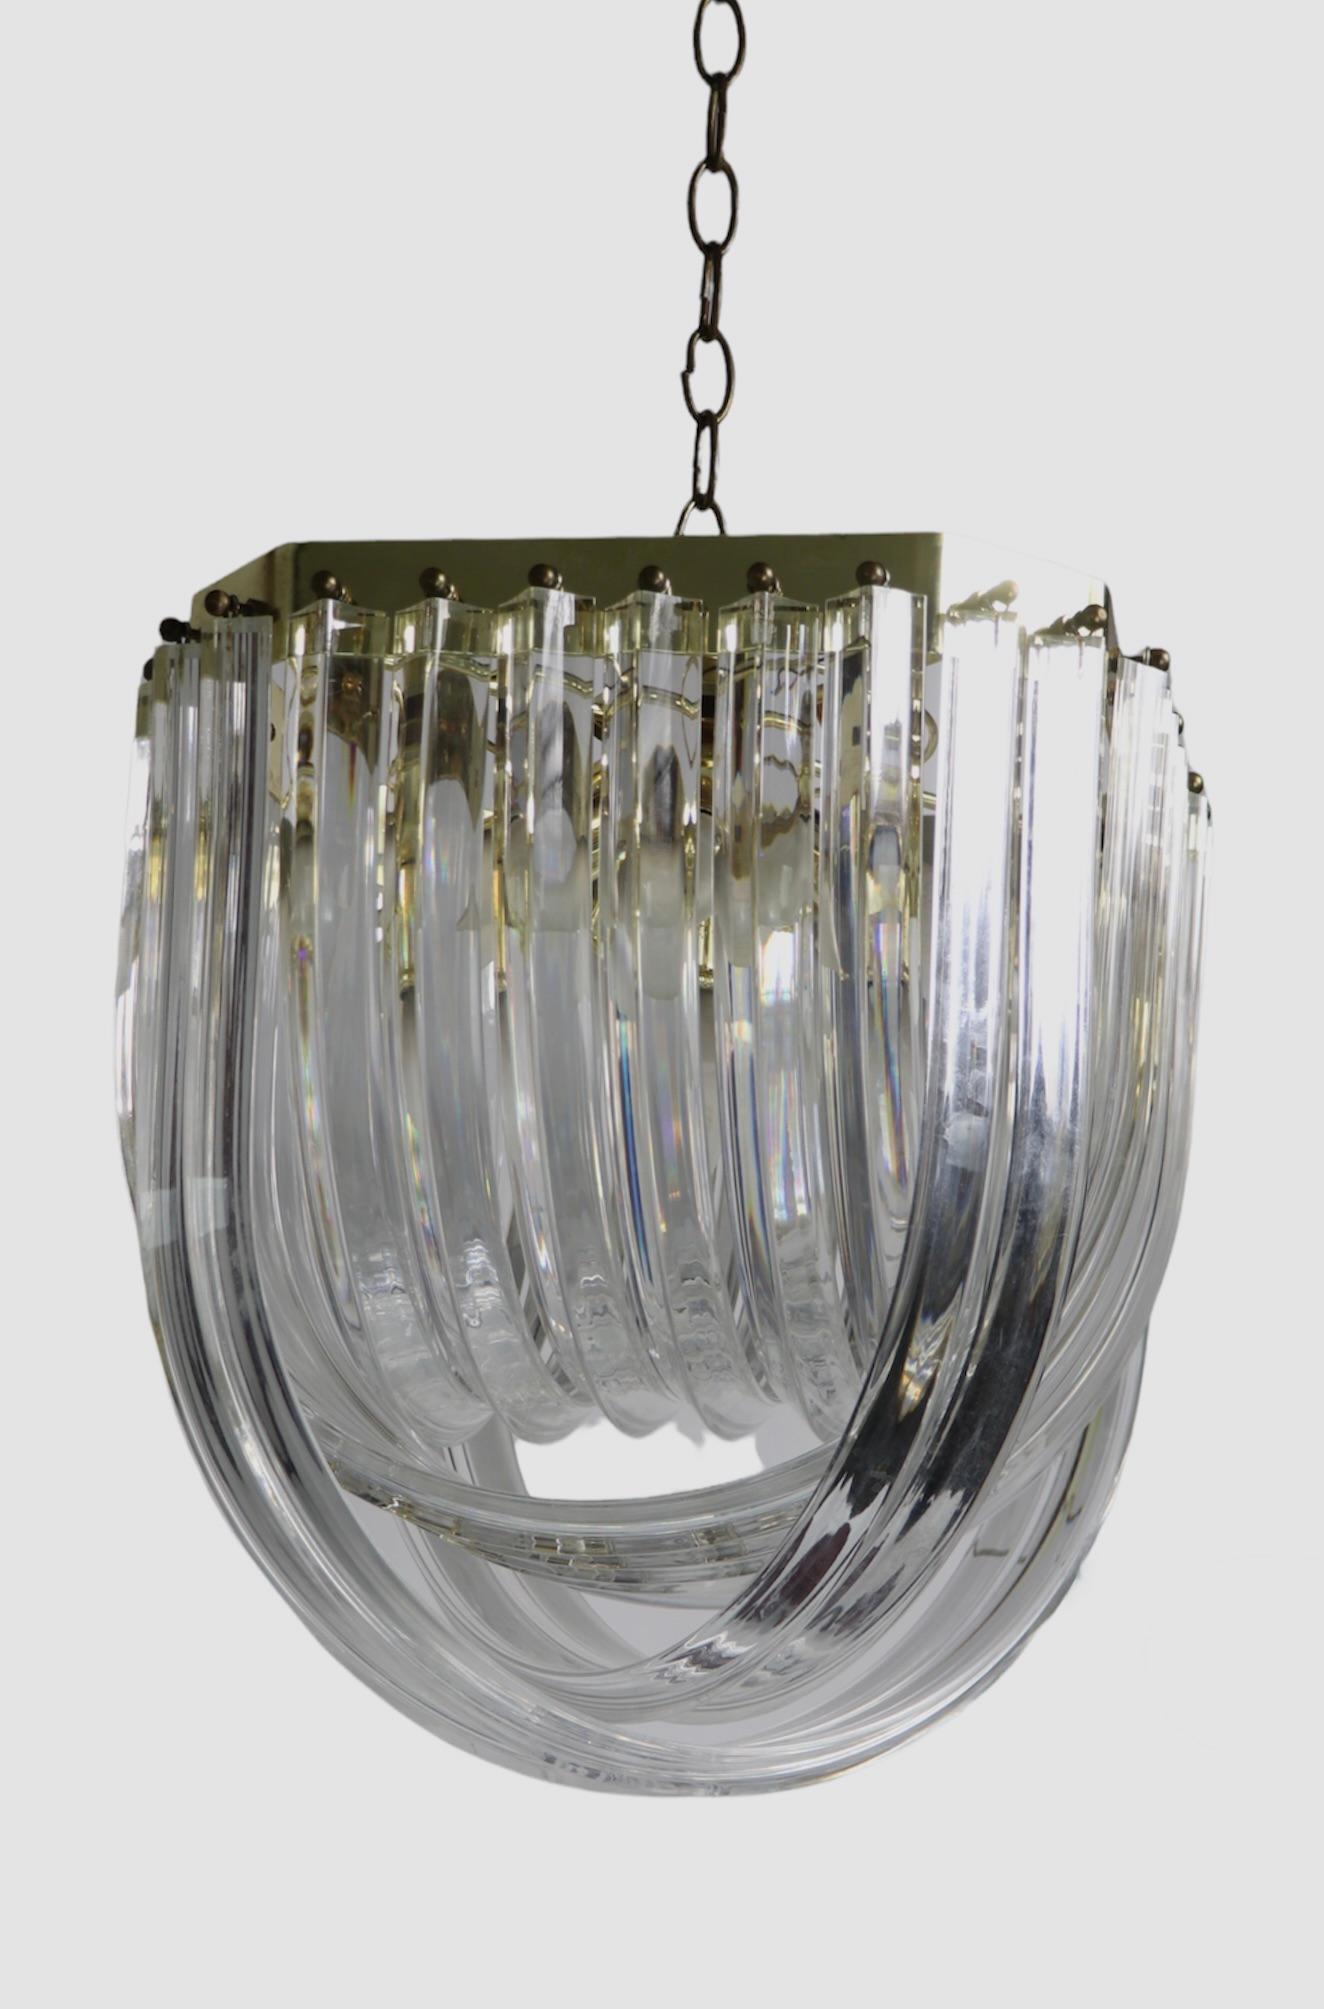 Sexy Post Modern, Art Deco Revival, Hollywood Regency lucite ribbon chandelier, in very good, original, clean and working condition. This statement chandelier features four interior sockets, creating an intriguing glow, and ample light when lit.